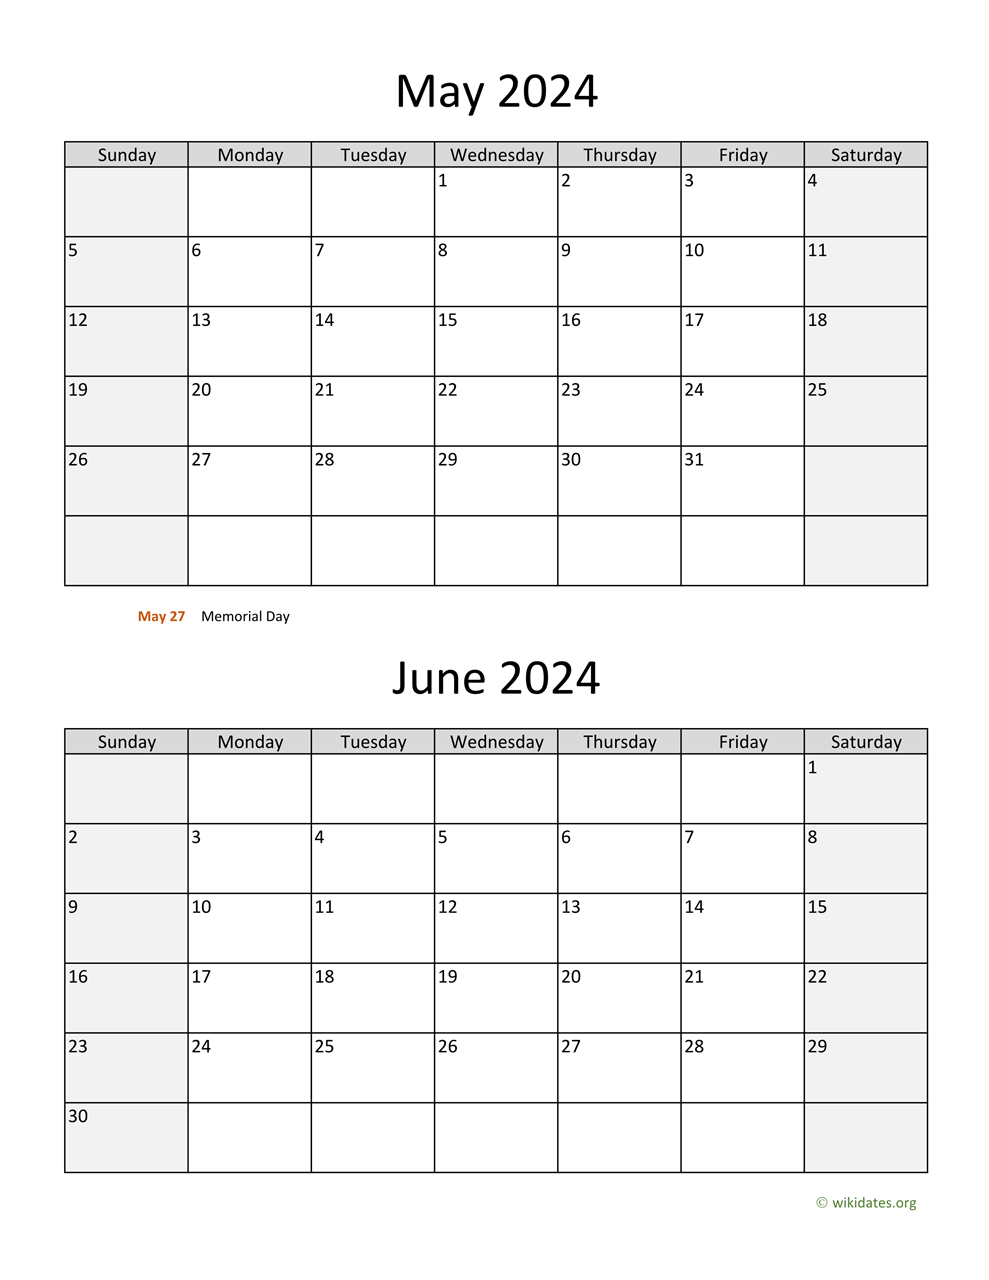 May And June 2024 Calendar | Wikidates for Printable Calendar For May And June 2024